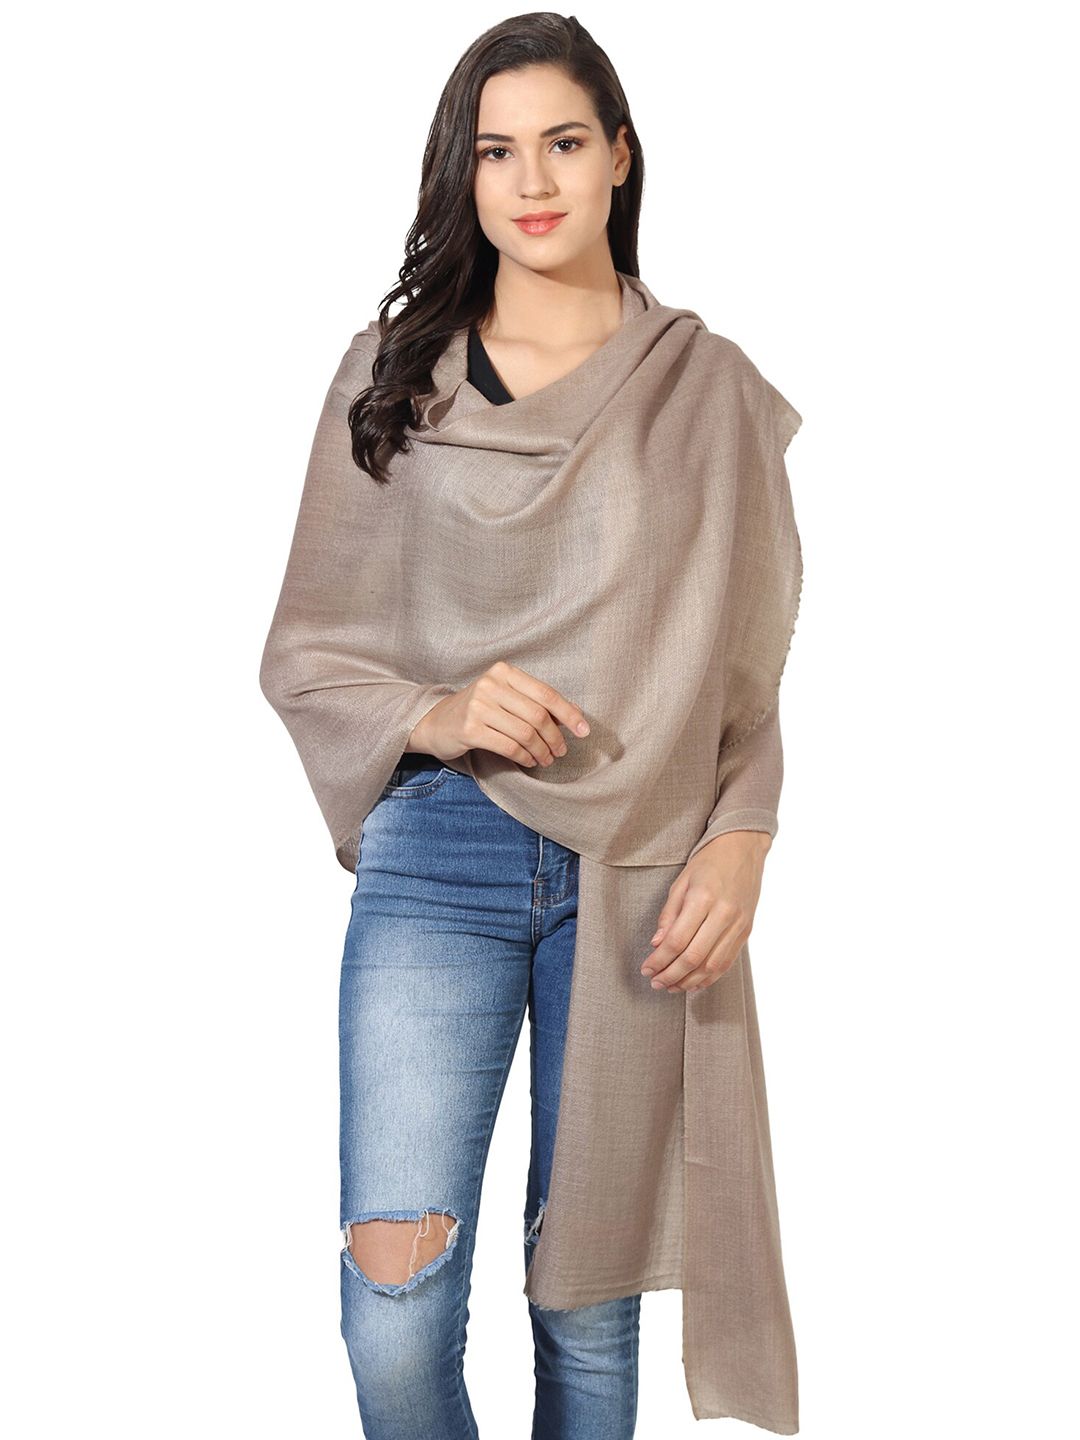 MUFFLY Women Tan Stoles Price in India